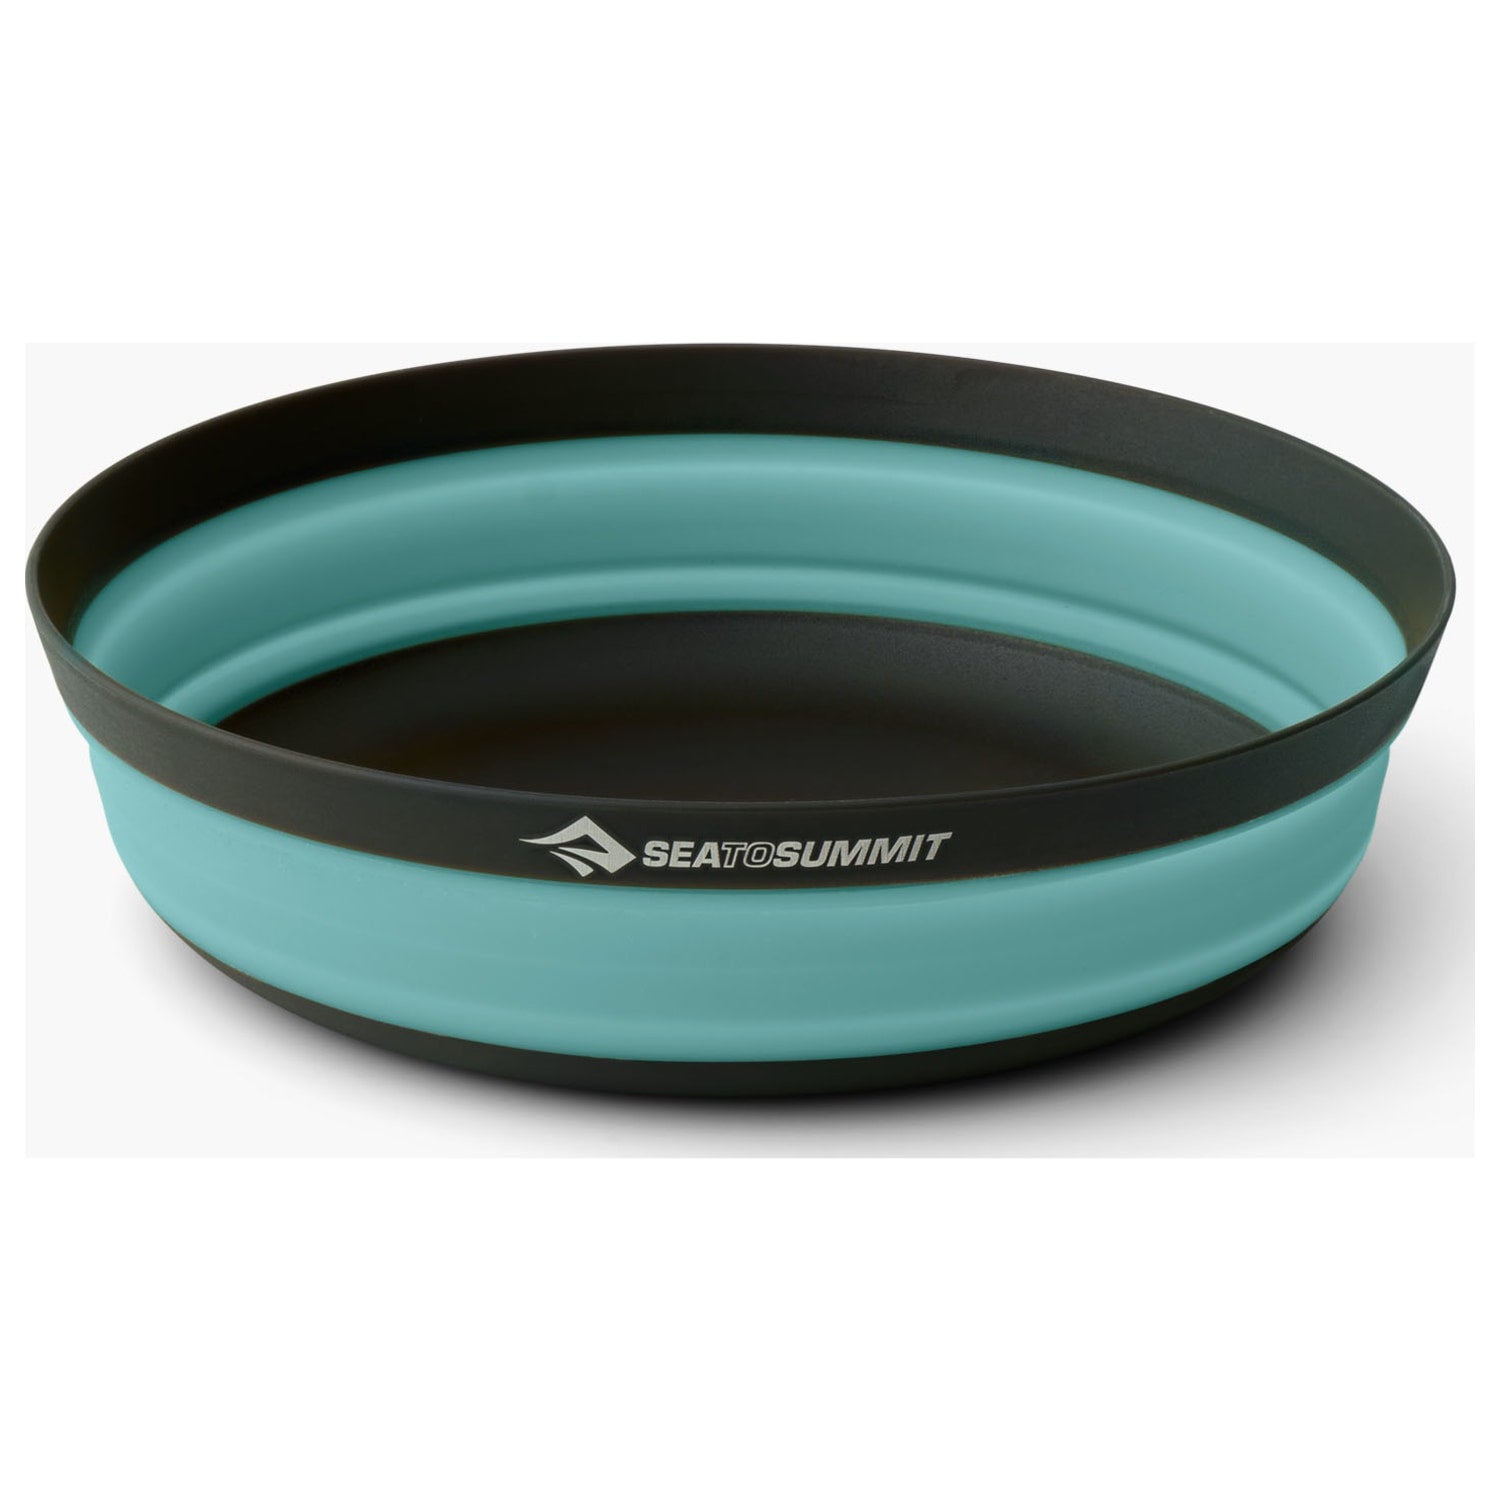 Sea to Summit Sea To Summit Frontier Collapsible Bowl - Medium or Large